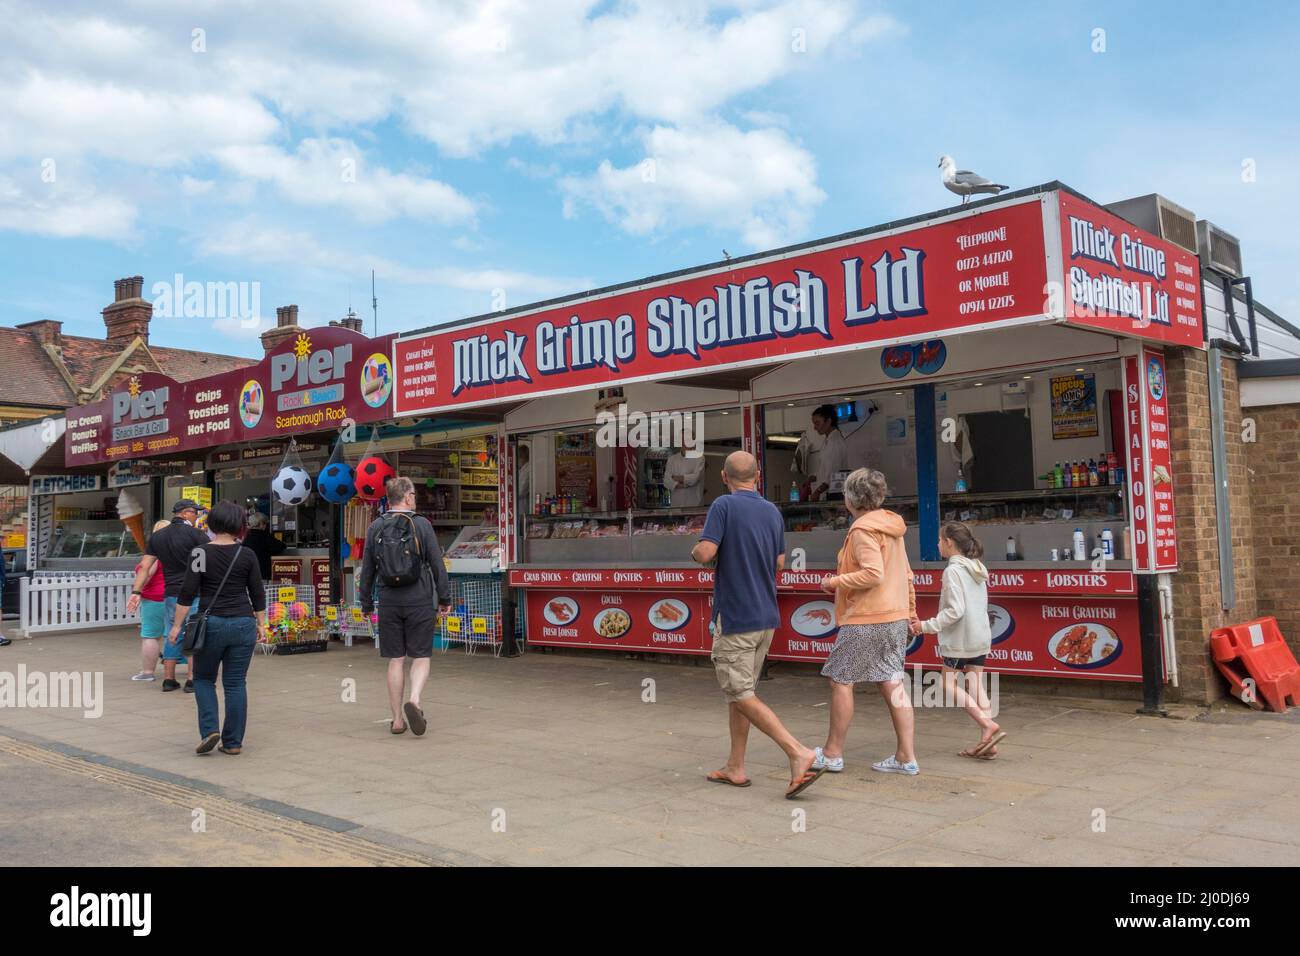 The Mick Grime Shellfish stall in Scarborough, a seaside resort on the North Sea in North Yorkshire, UK Stock Photo